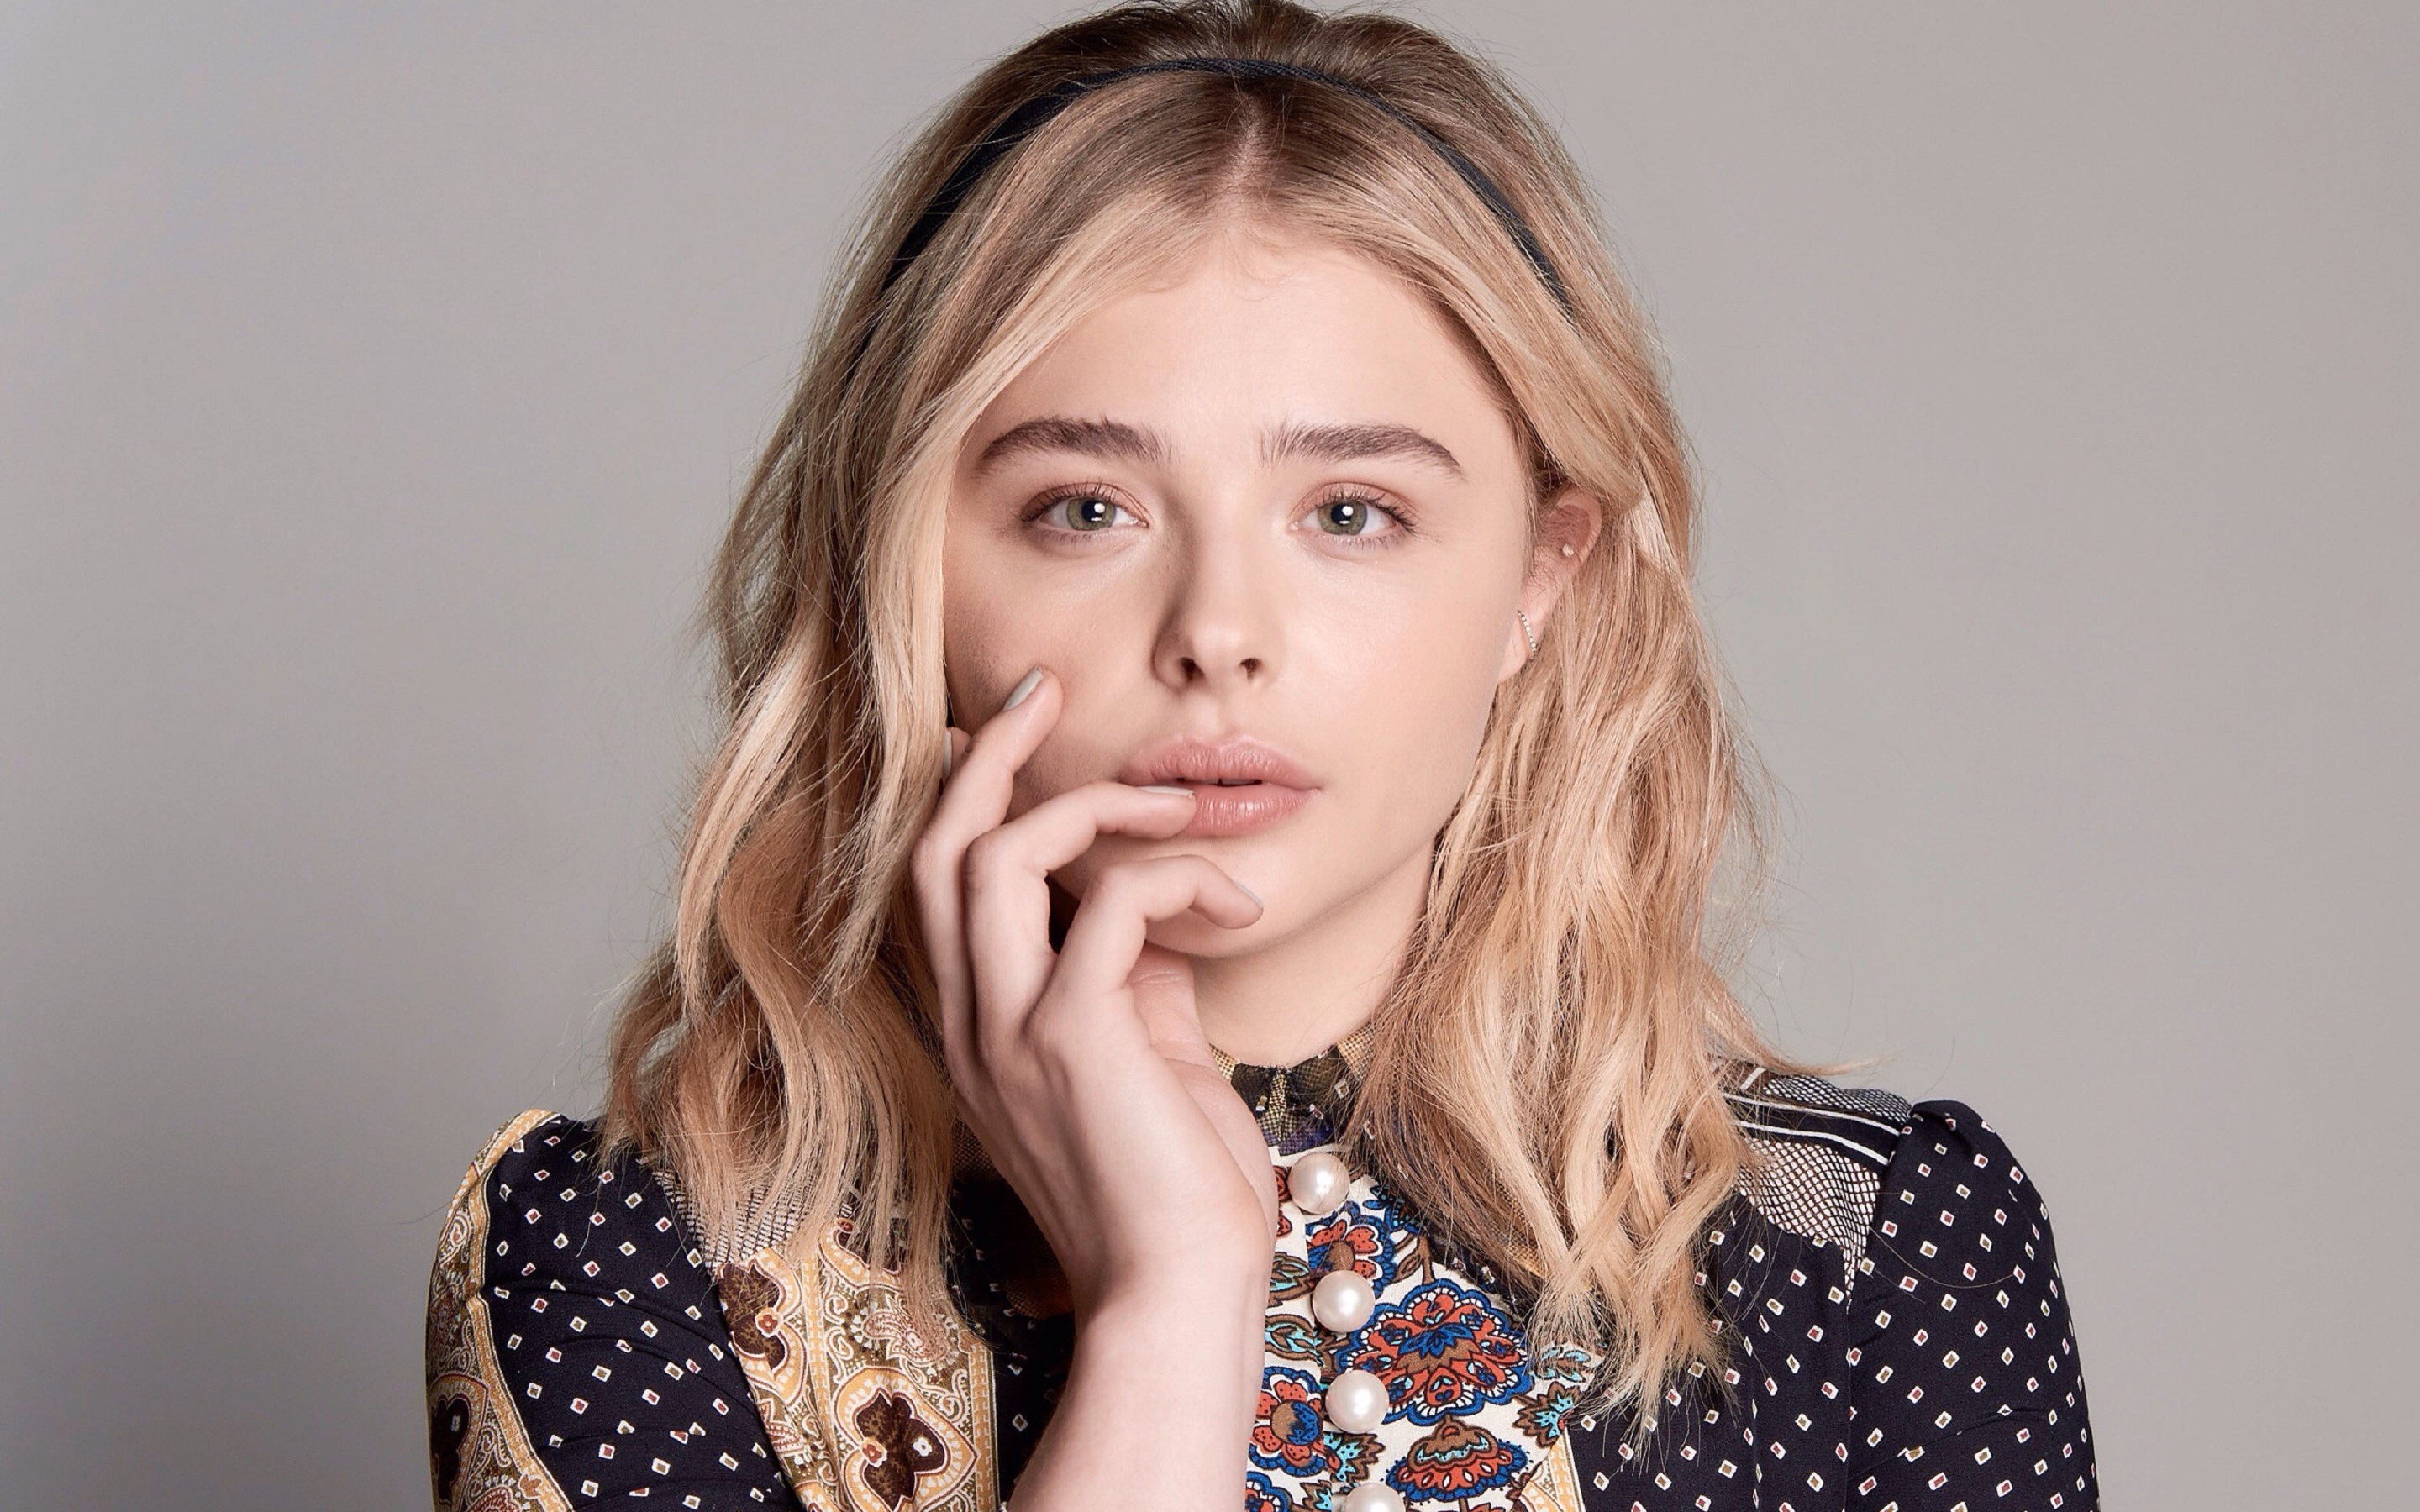 Chloe Moretz Looking Lovely for 2880 x 1800 Retina Display resolution